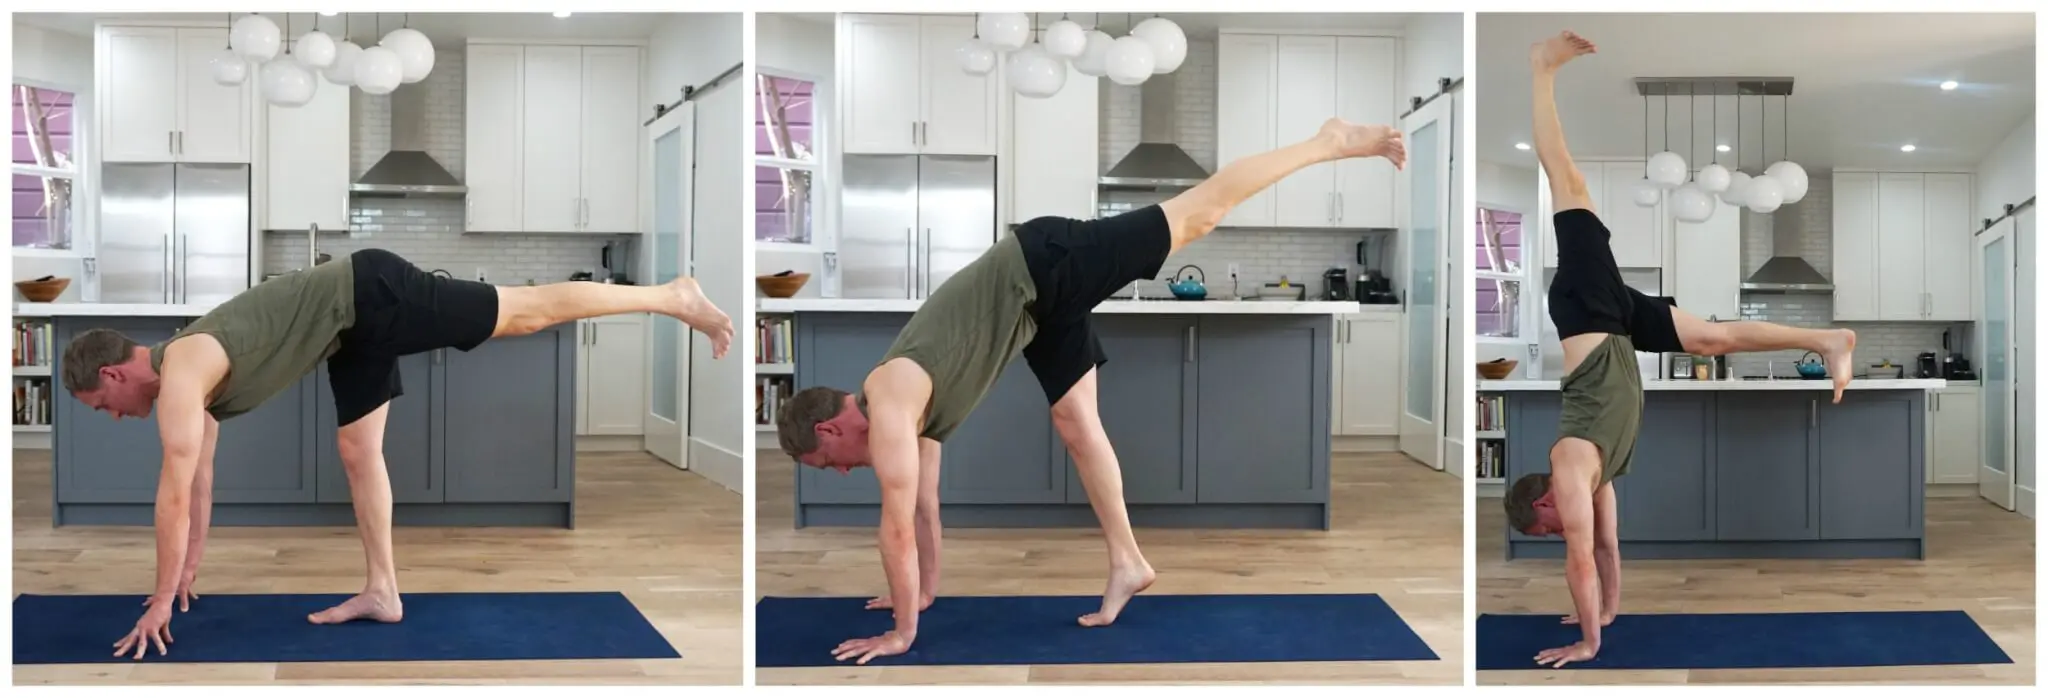 One Cue That Will Make Your Yoga Transitions Easier - TINT Yoga